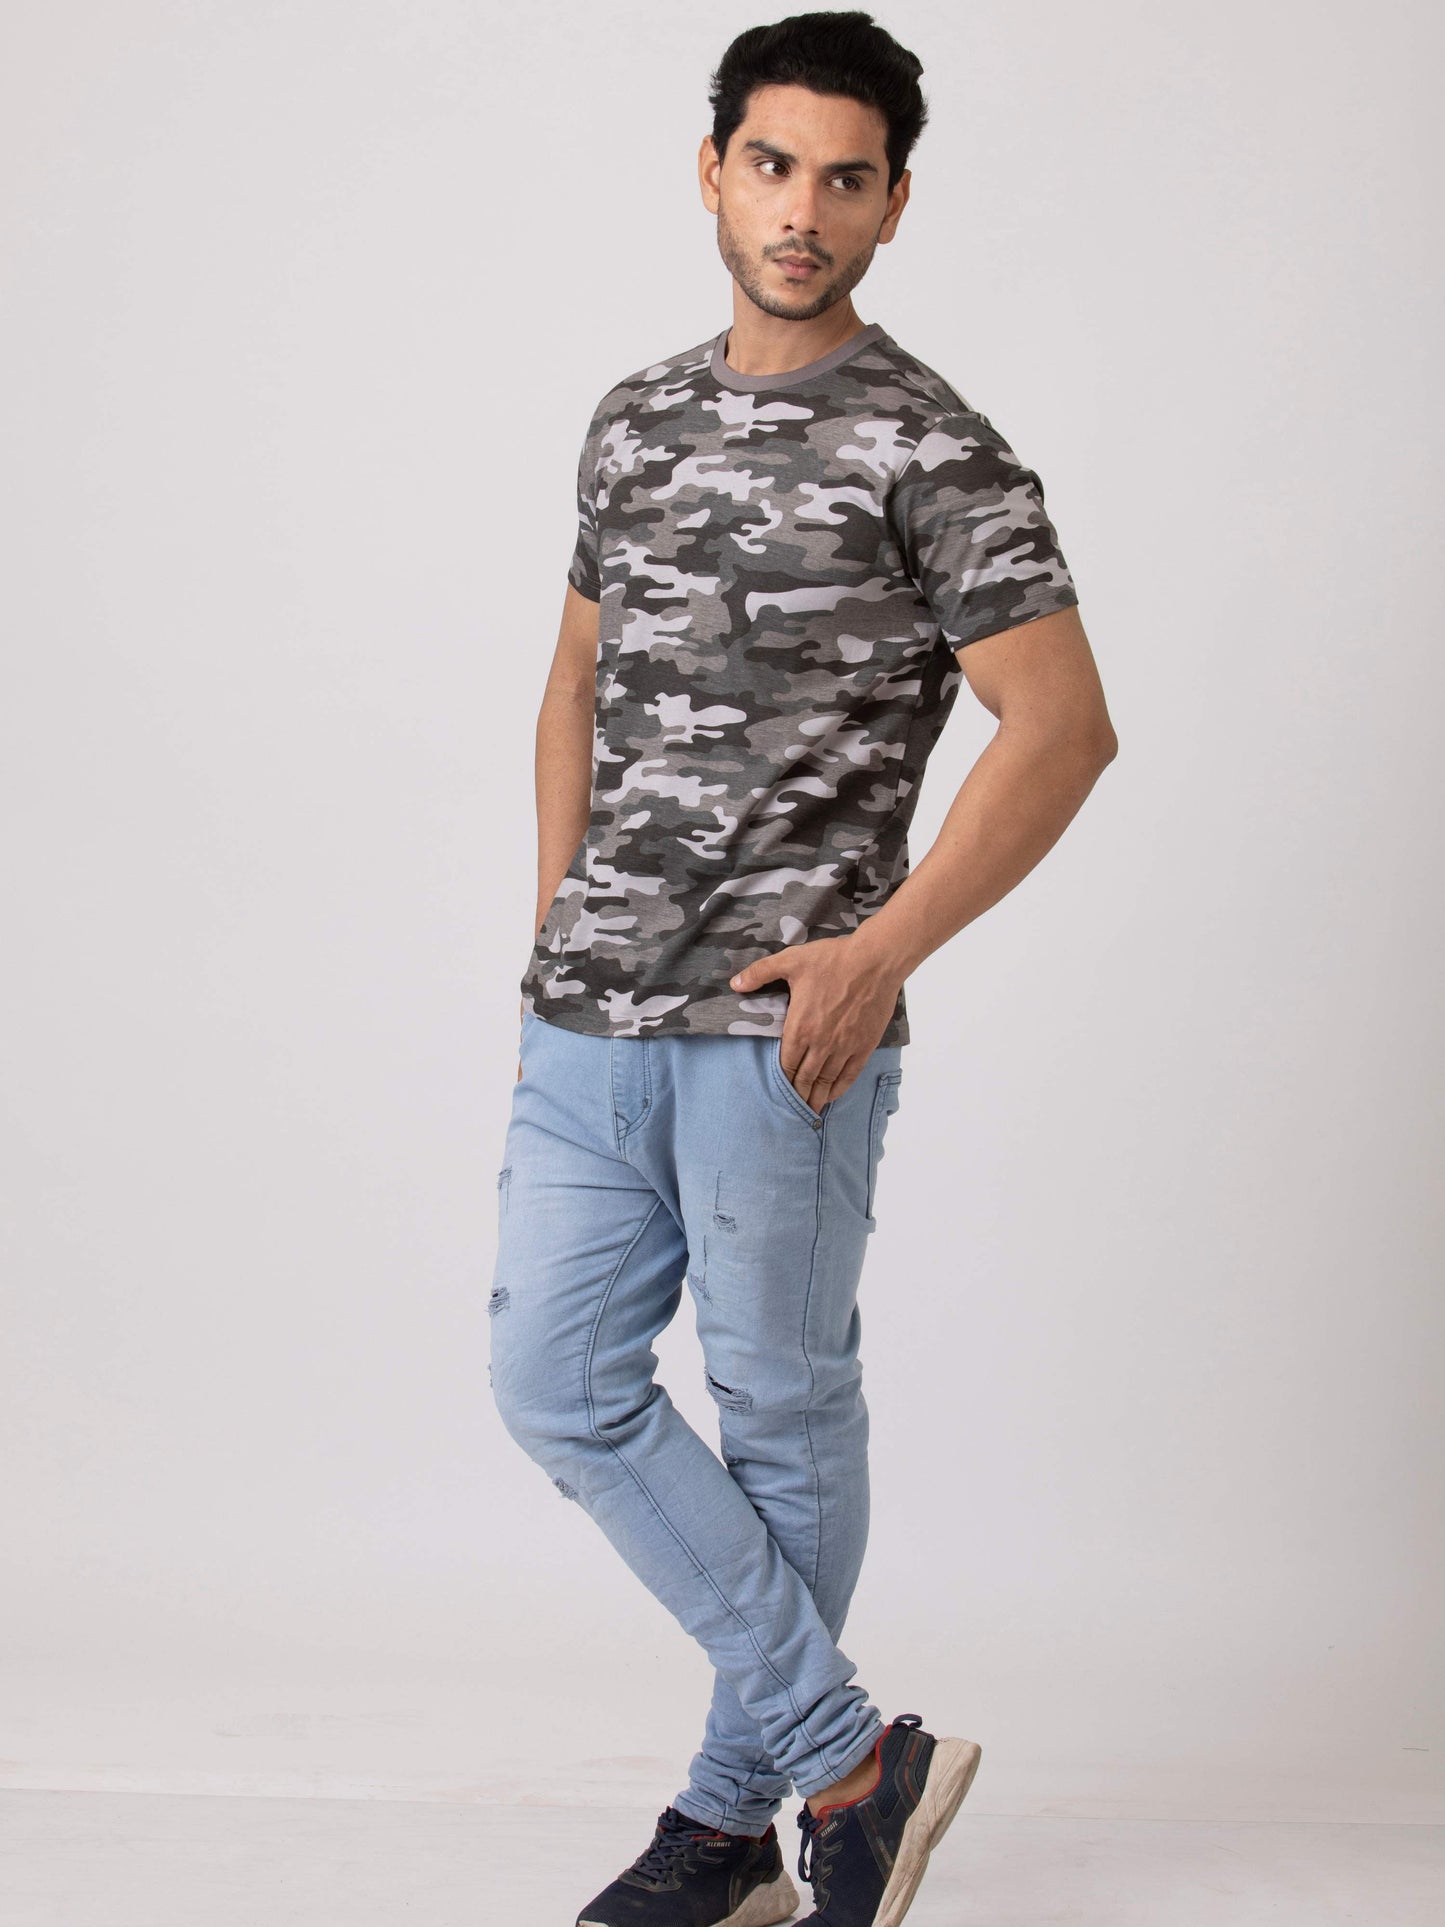 Stealthy Military Camouflage  Men's Cotton round neck T-Shirt